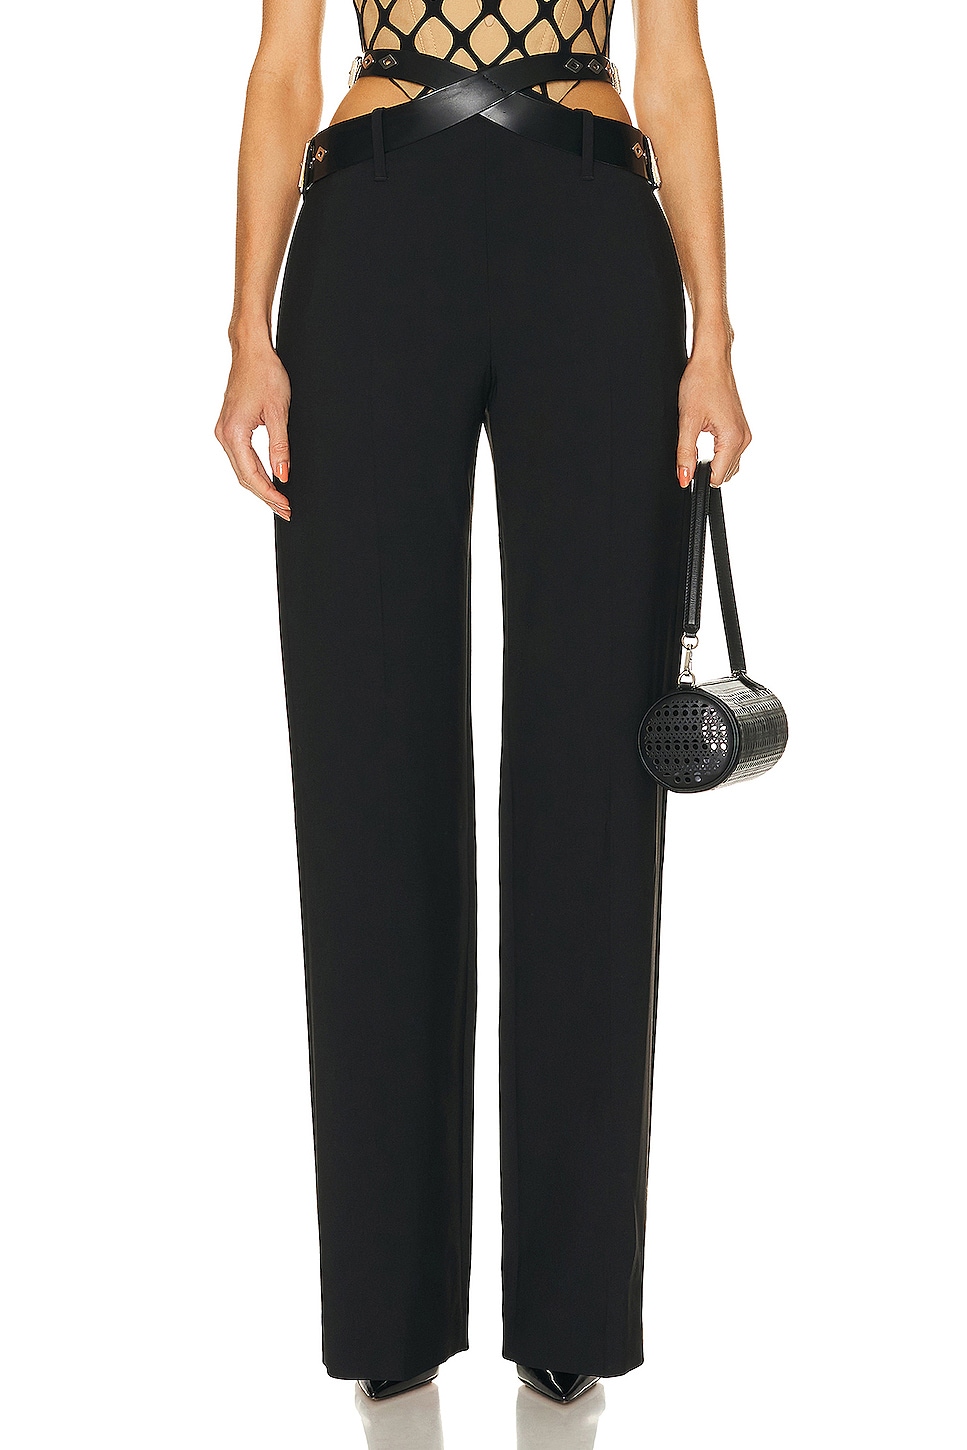 Image 1 of Dion Lee Constrictor Pant in Black